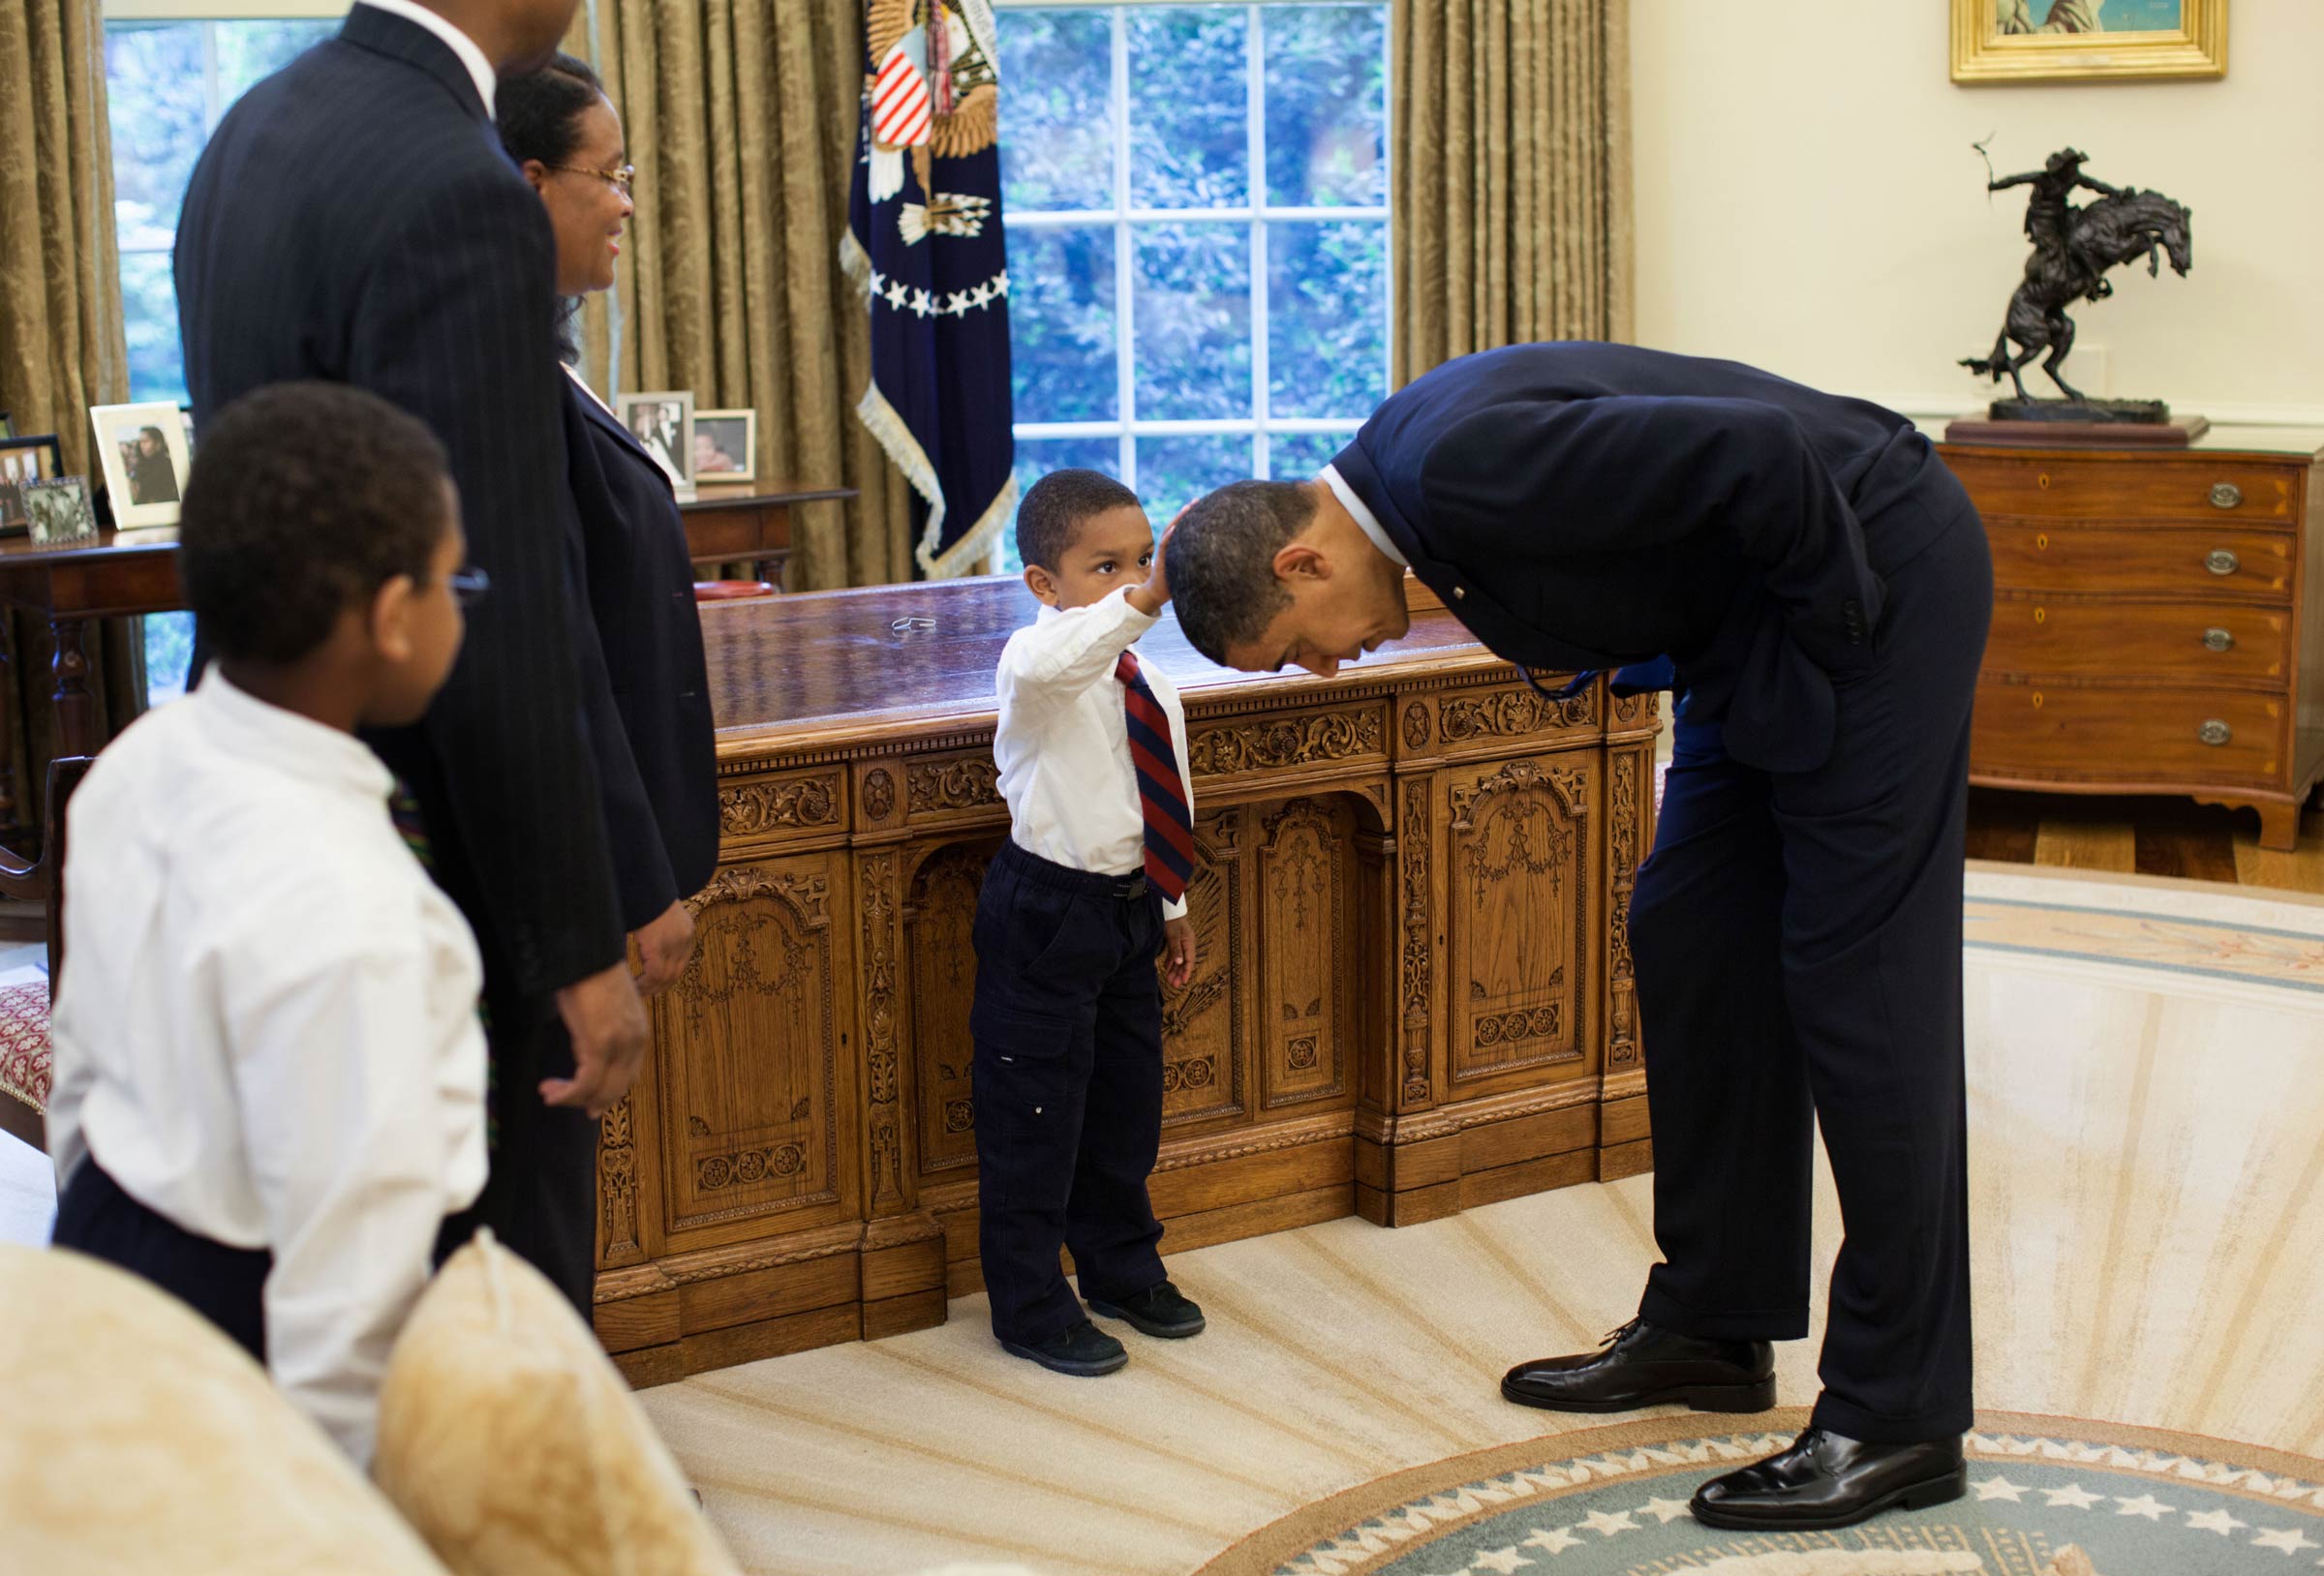 Obama letting a little kid touch his head